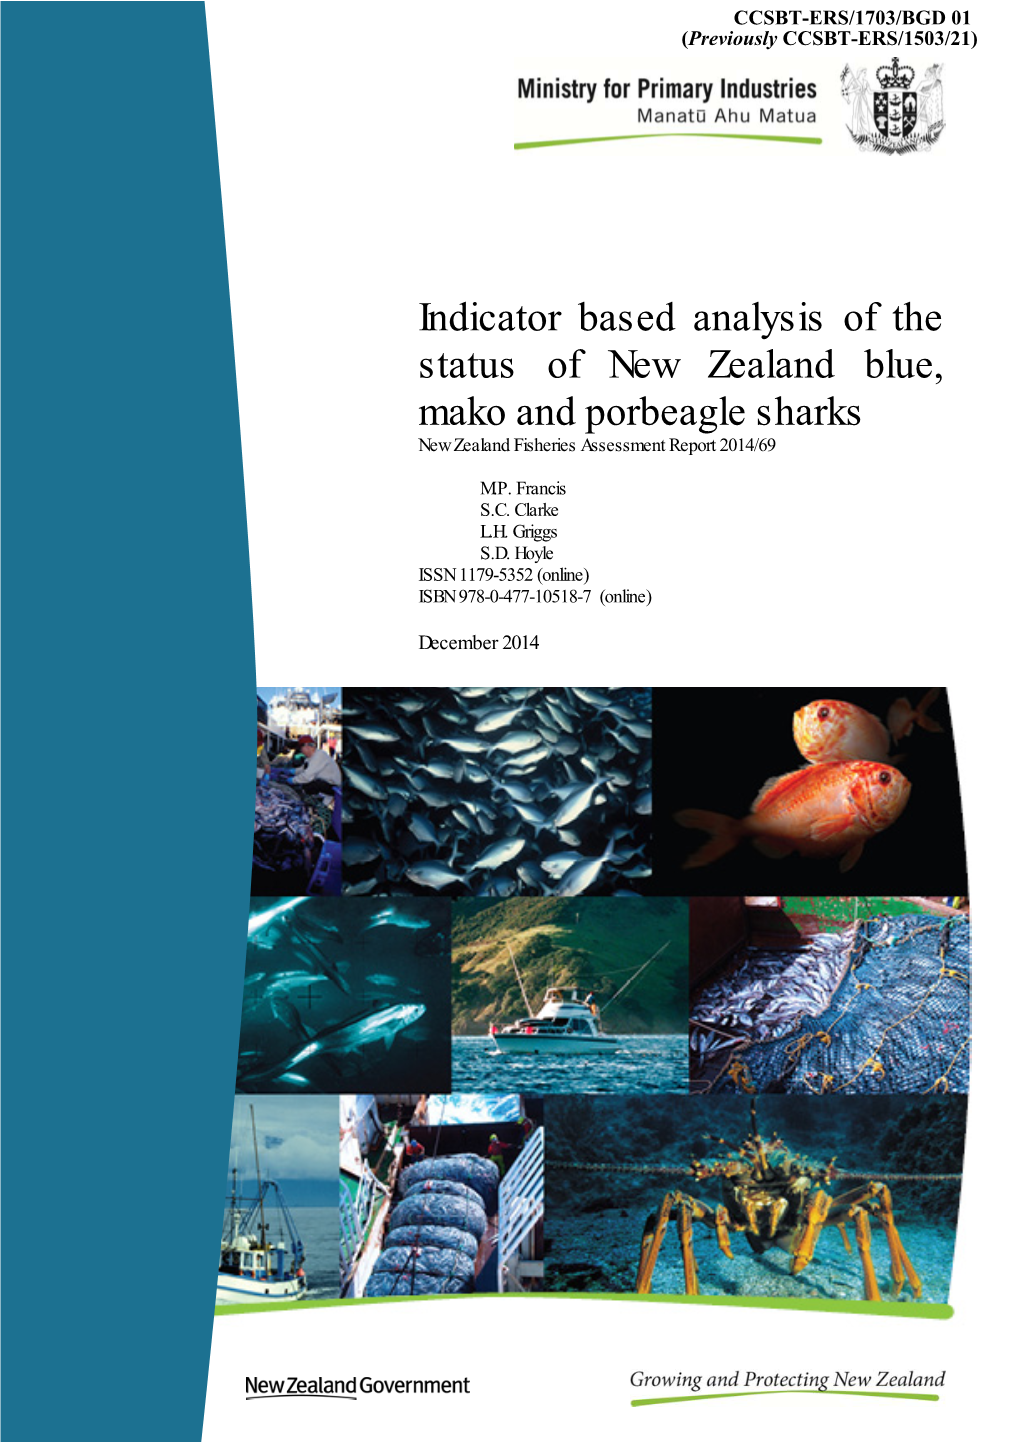 Indicator Based Analysis of the Status of New Zealand Blue, Mako and Porbeagle Sharks New Zealand Fisheries Assessment Report 2014/69